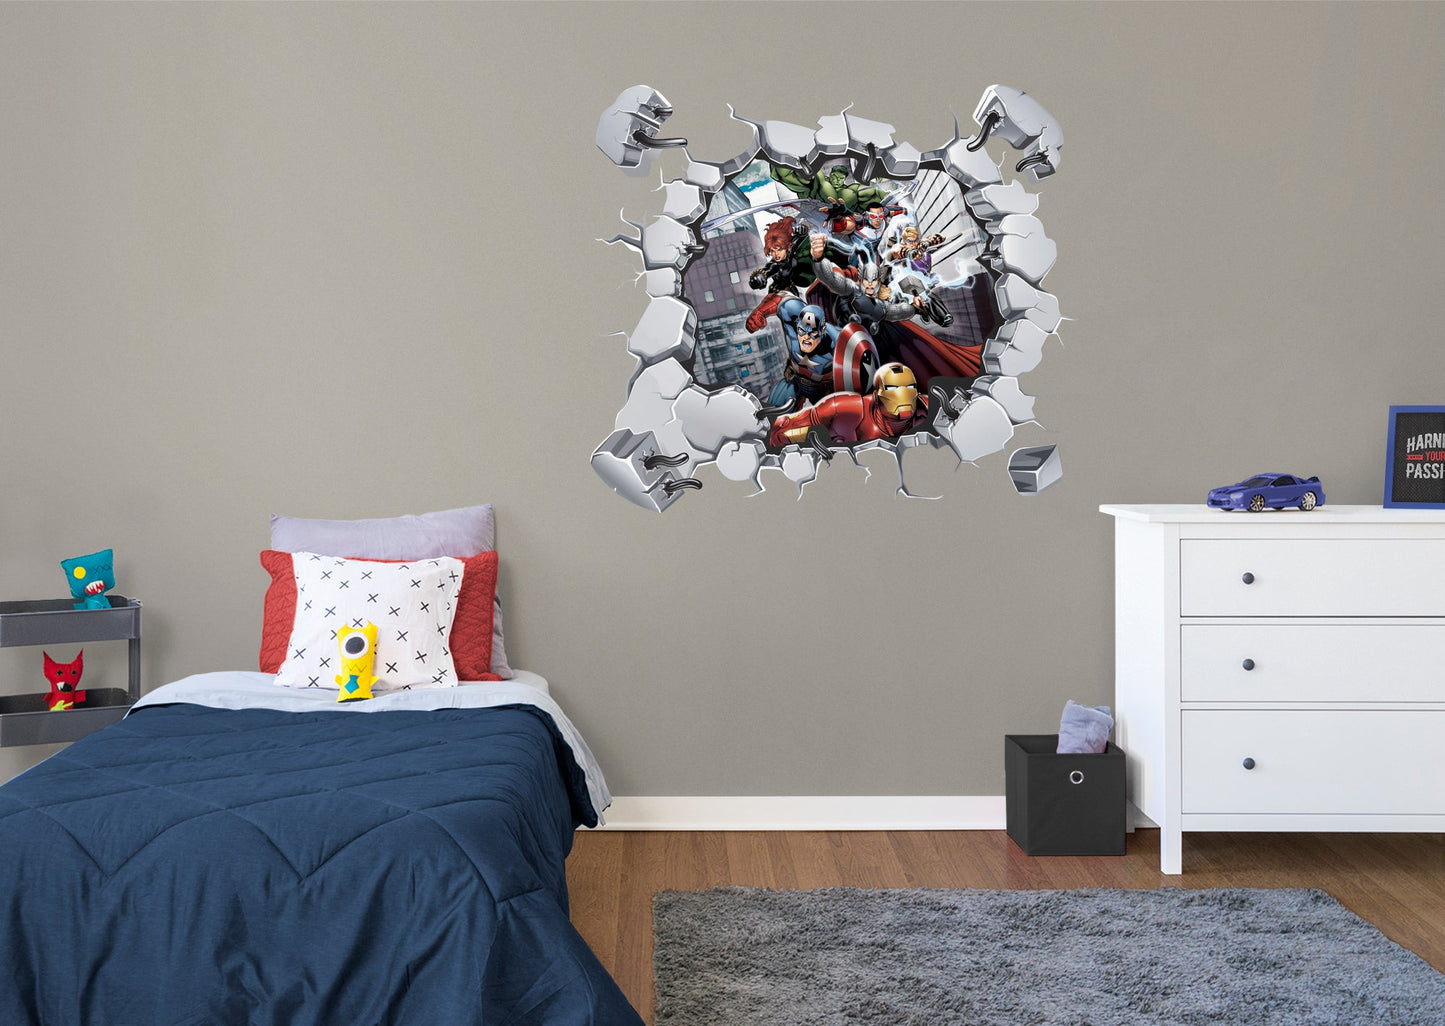 Avengers: Broken Wall 3 Instant Window - Officially Licensed Marvel Removable Adhesive Decal